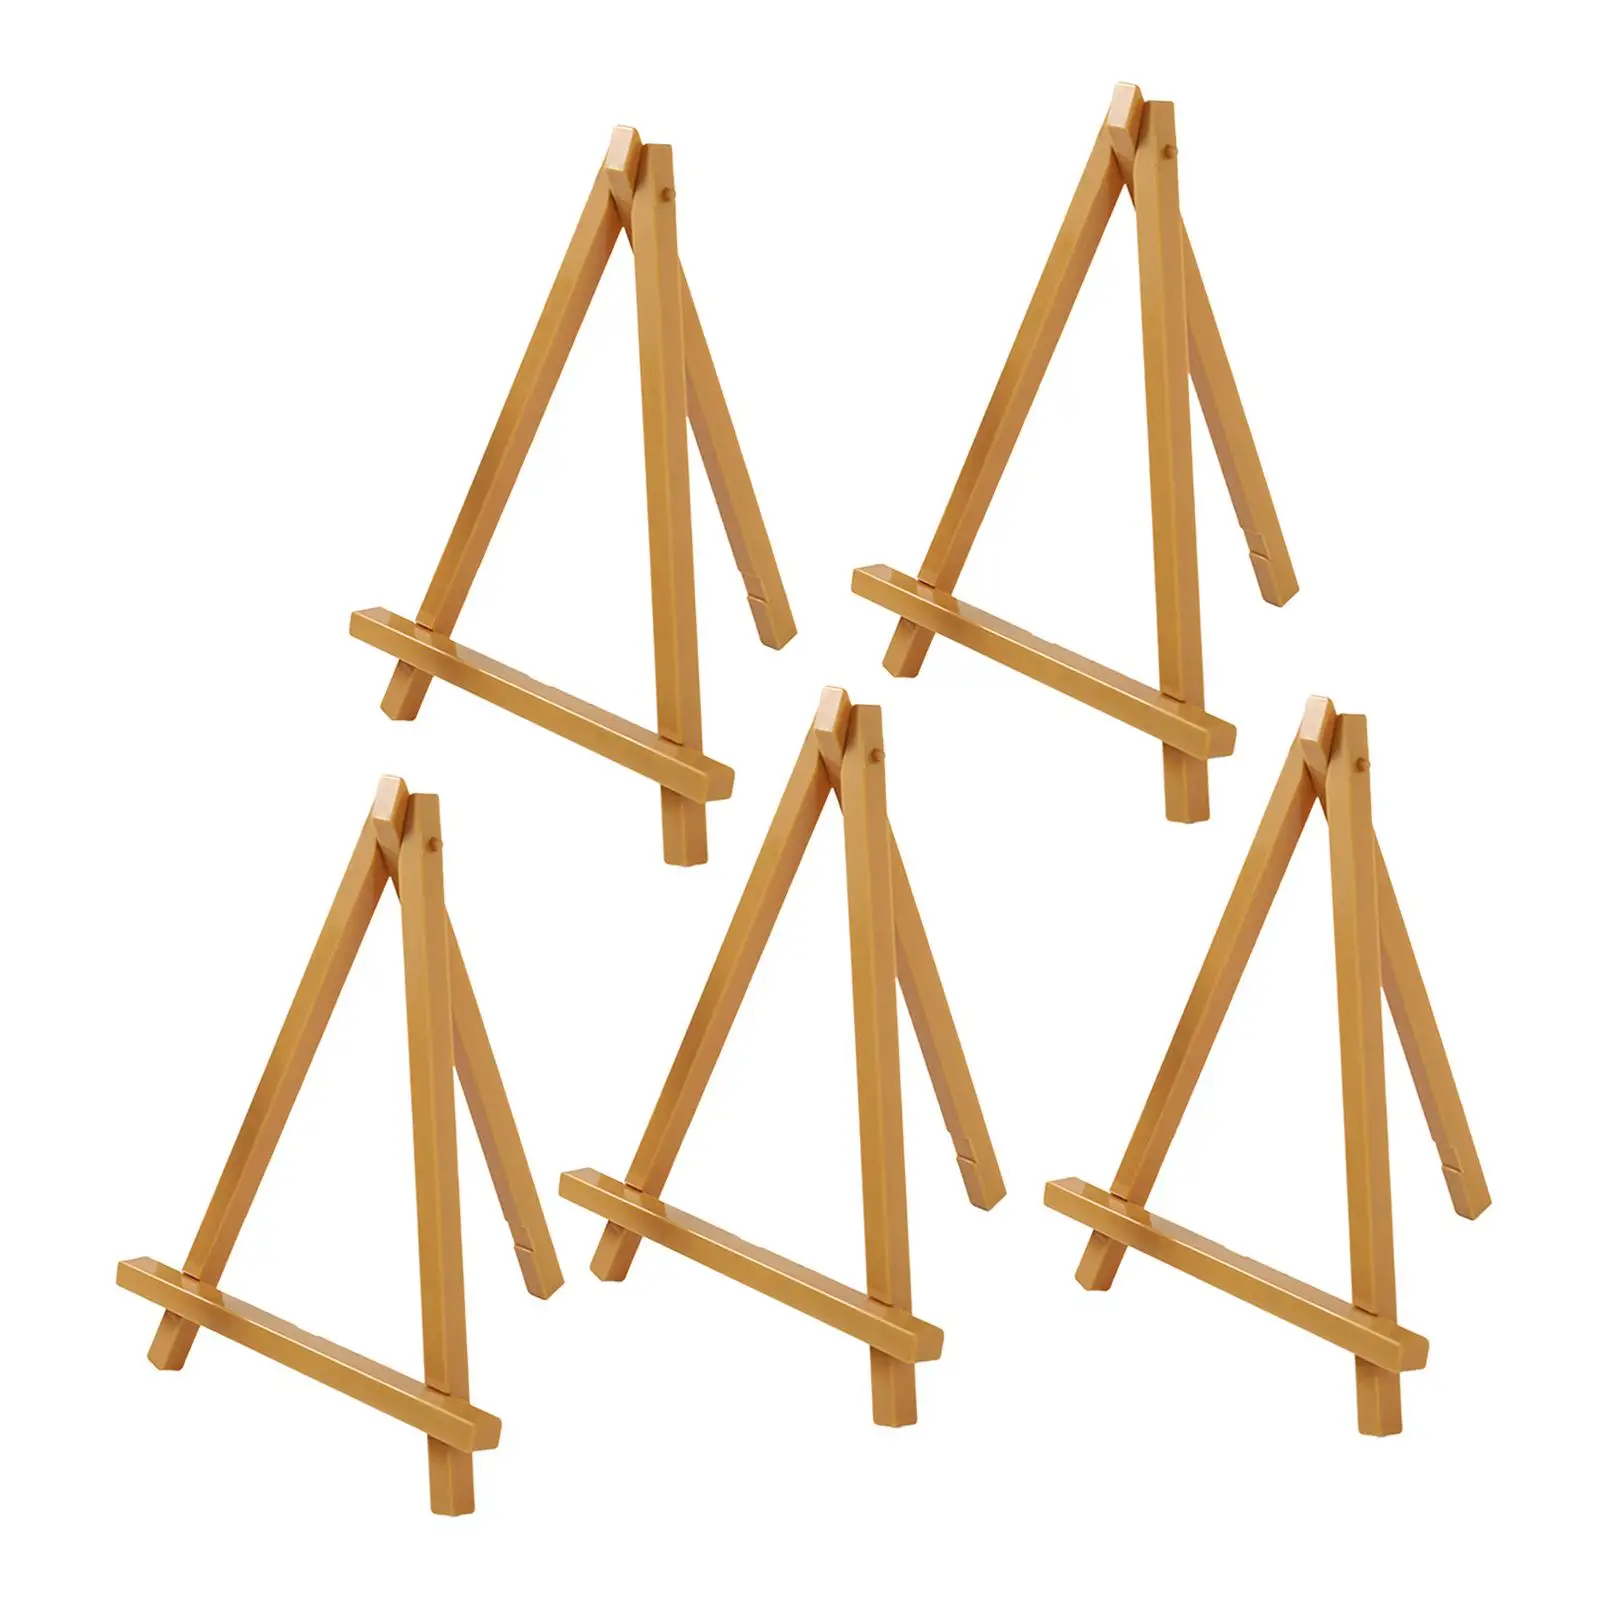 5 Pieces Wood Mini Easel Holder Cemetery Telescoping Easel Tripod Photo Posters Adjustable Height Artist Birthday Displaying Art